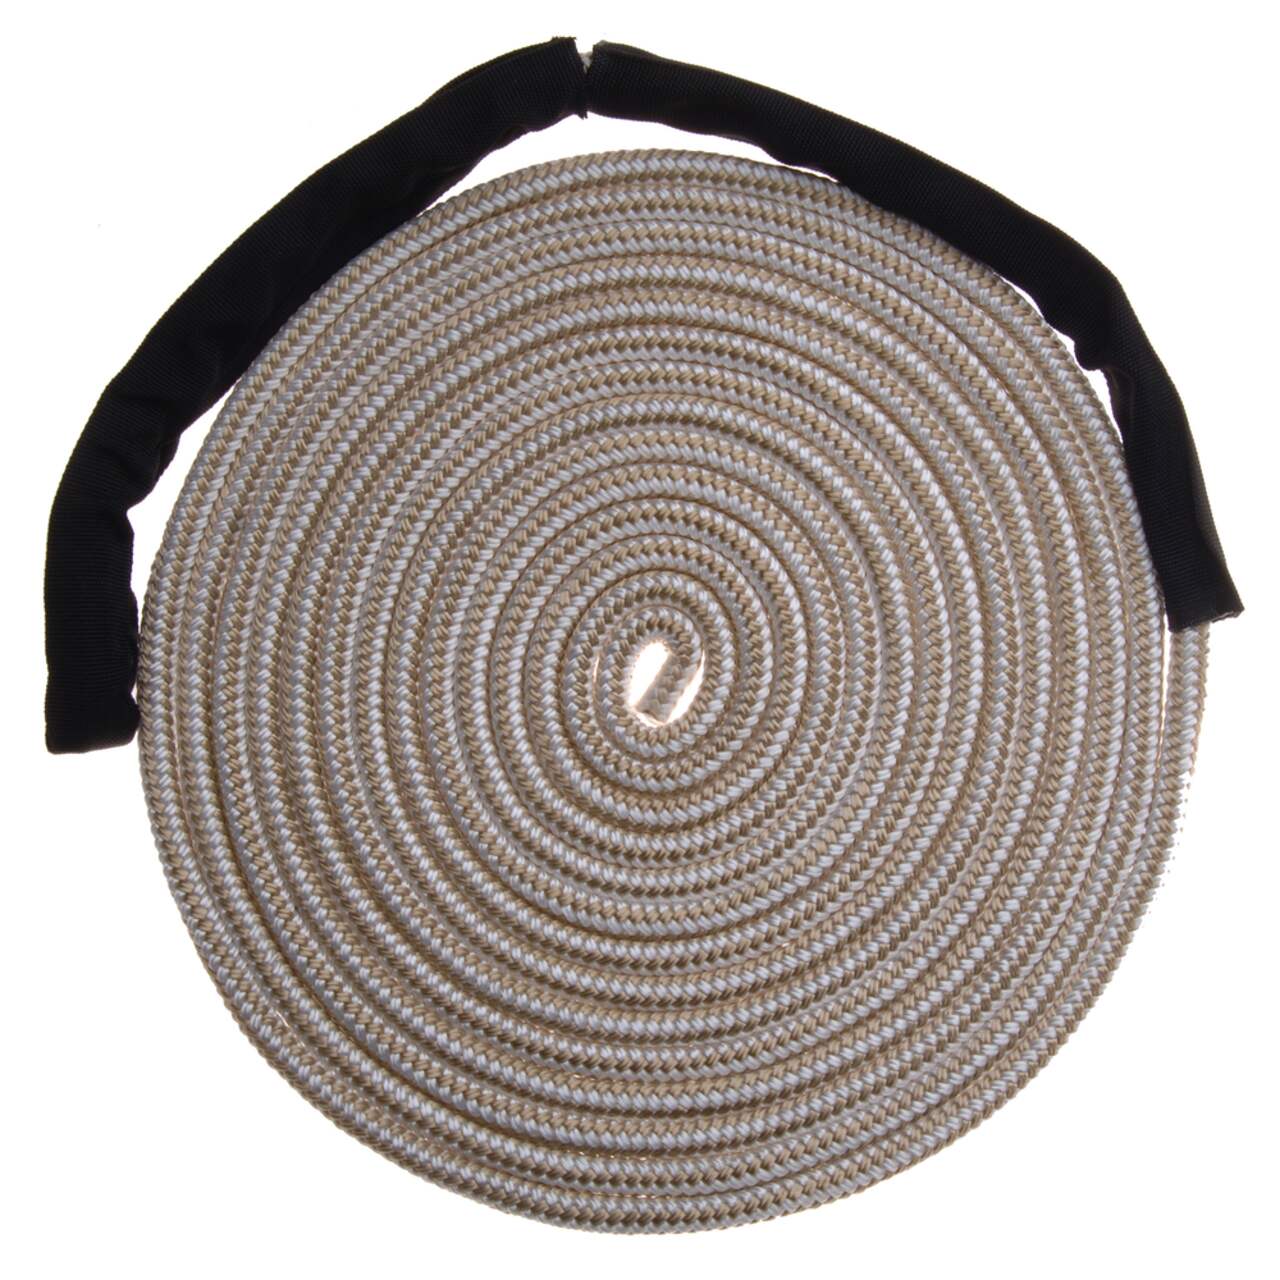 3/8 x 20' Gold/White - (2 Pack) - REFLECTIVE Double Braided Nylon